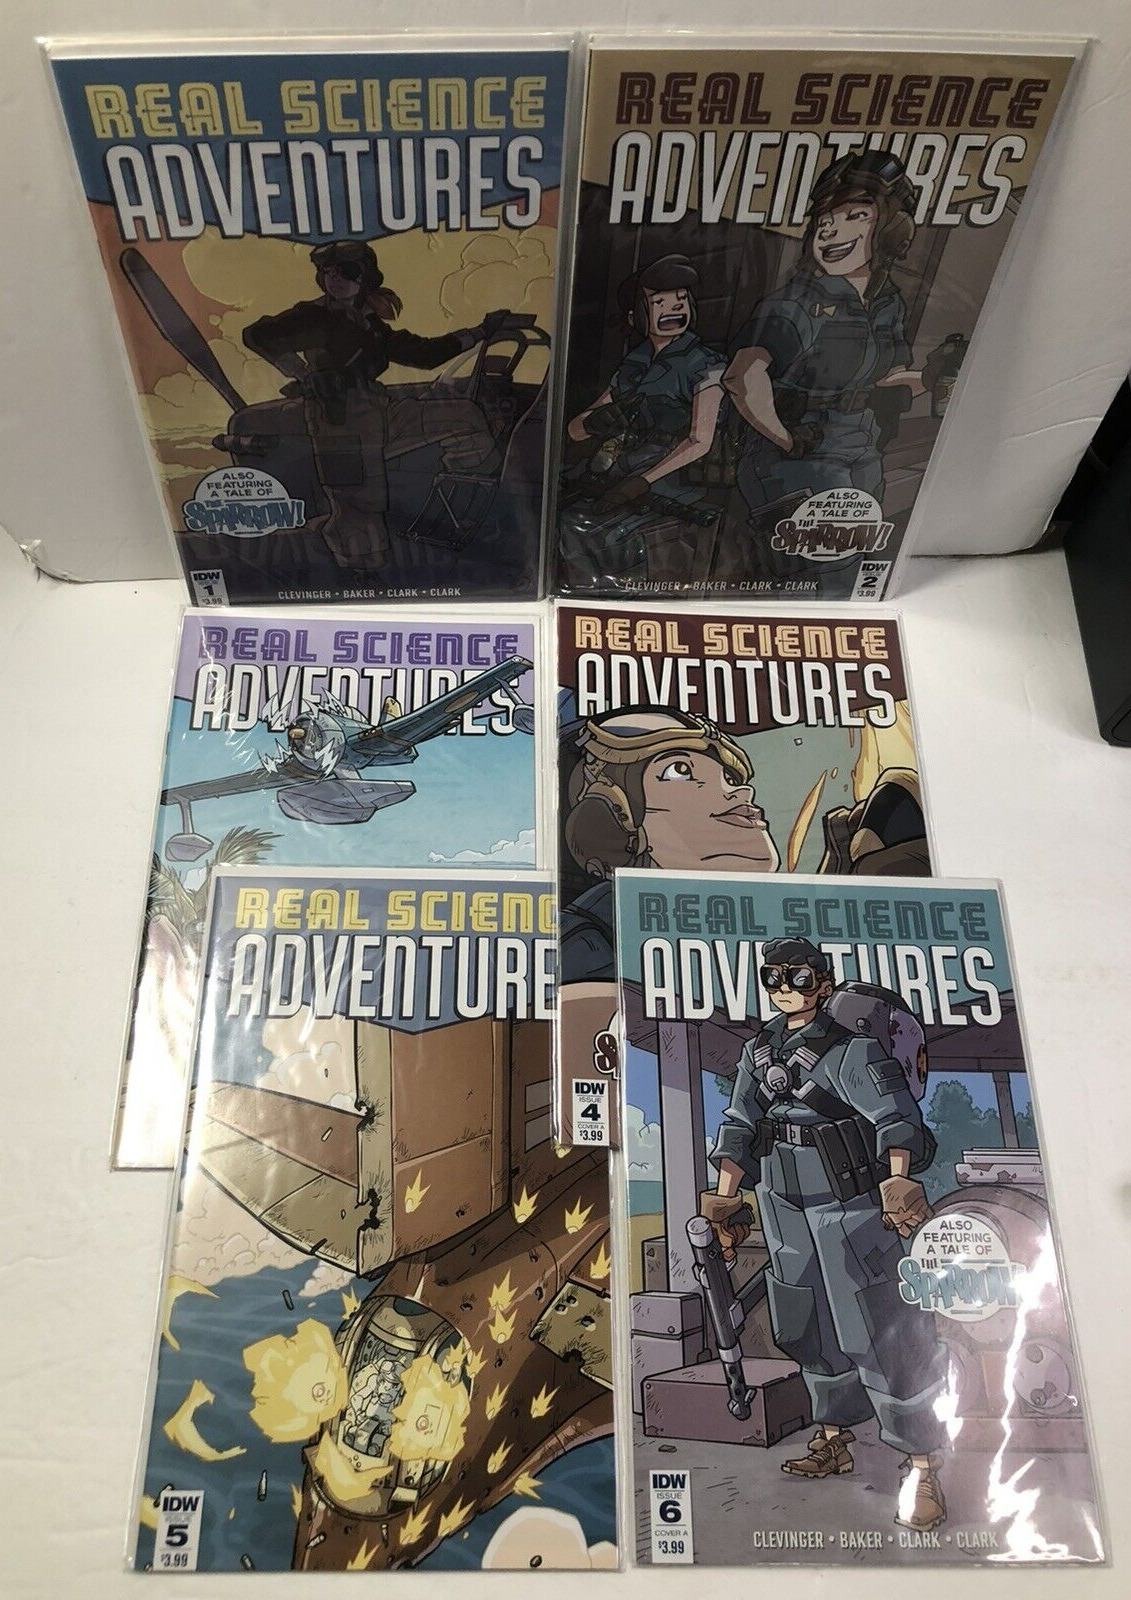 Atomic Robo Presents: Real Science Adventures - Full set of 6 comic books - IDW